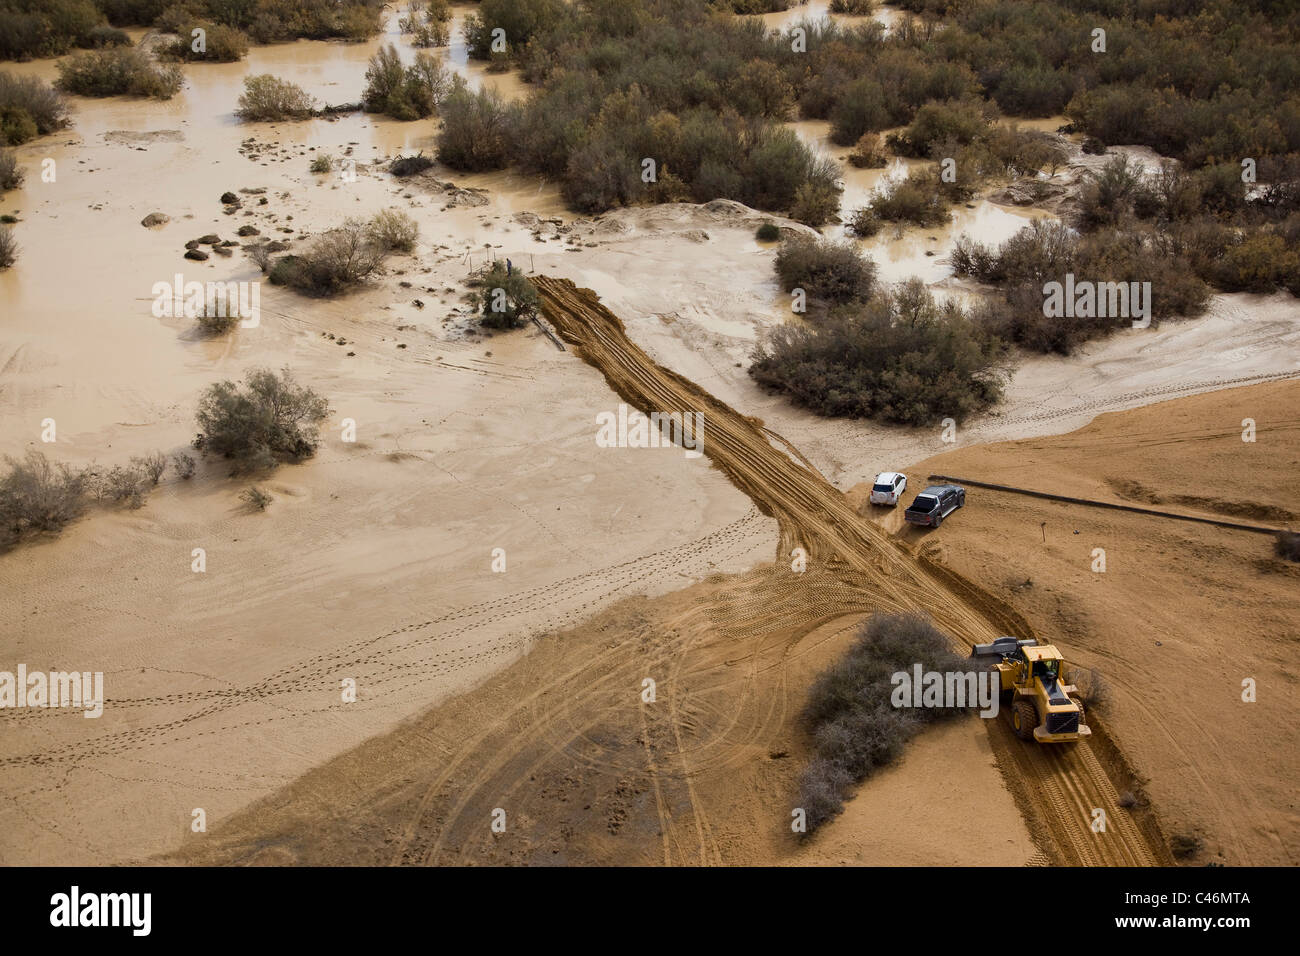 Aerial photograph of a tractor clearing a road in the Bsor stream after a flood in the Negev desert at winter Stock Photo